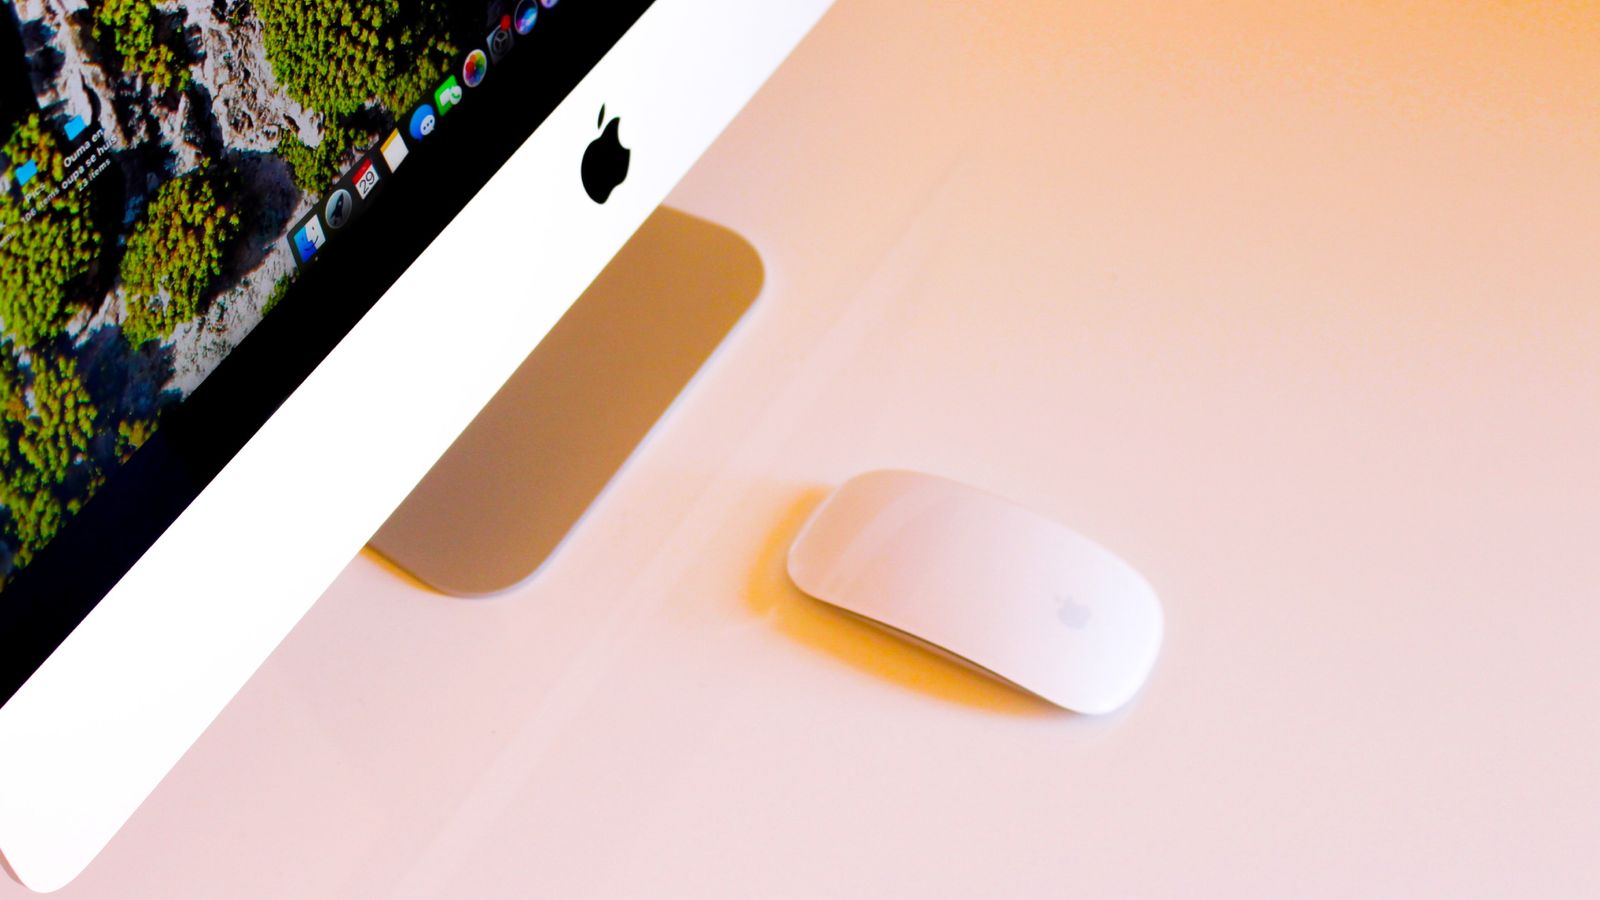 Switched on silver Mac next to a white Apple Magic Mouse placed on a light pink and orange surface.